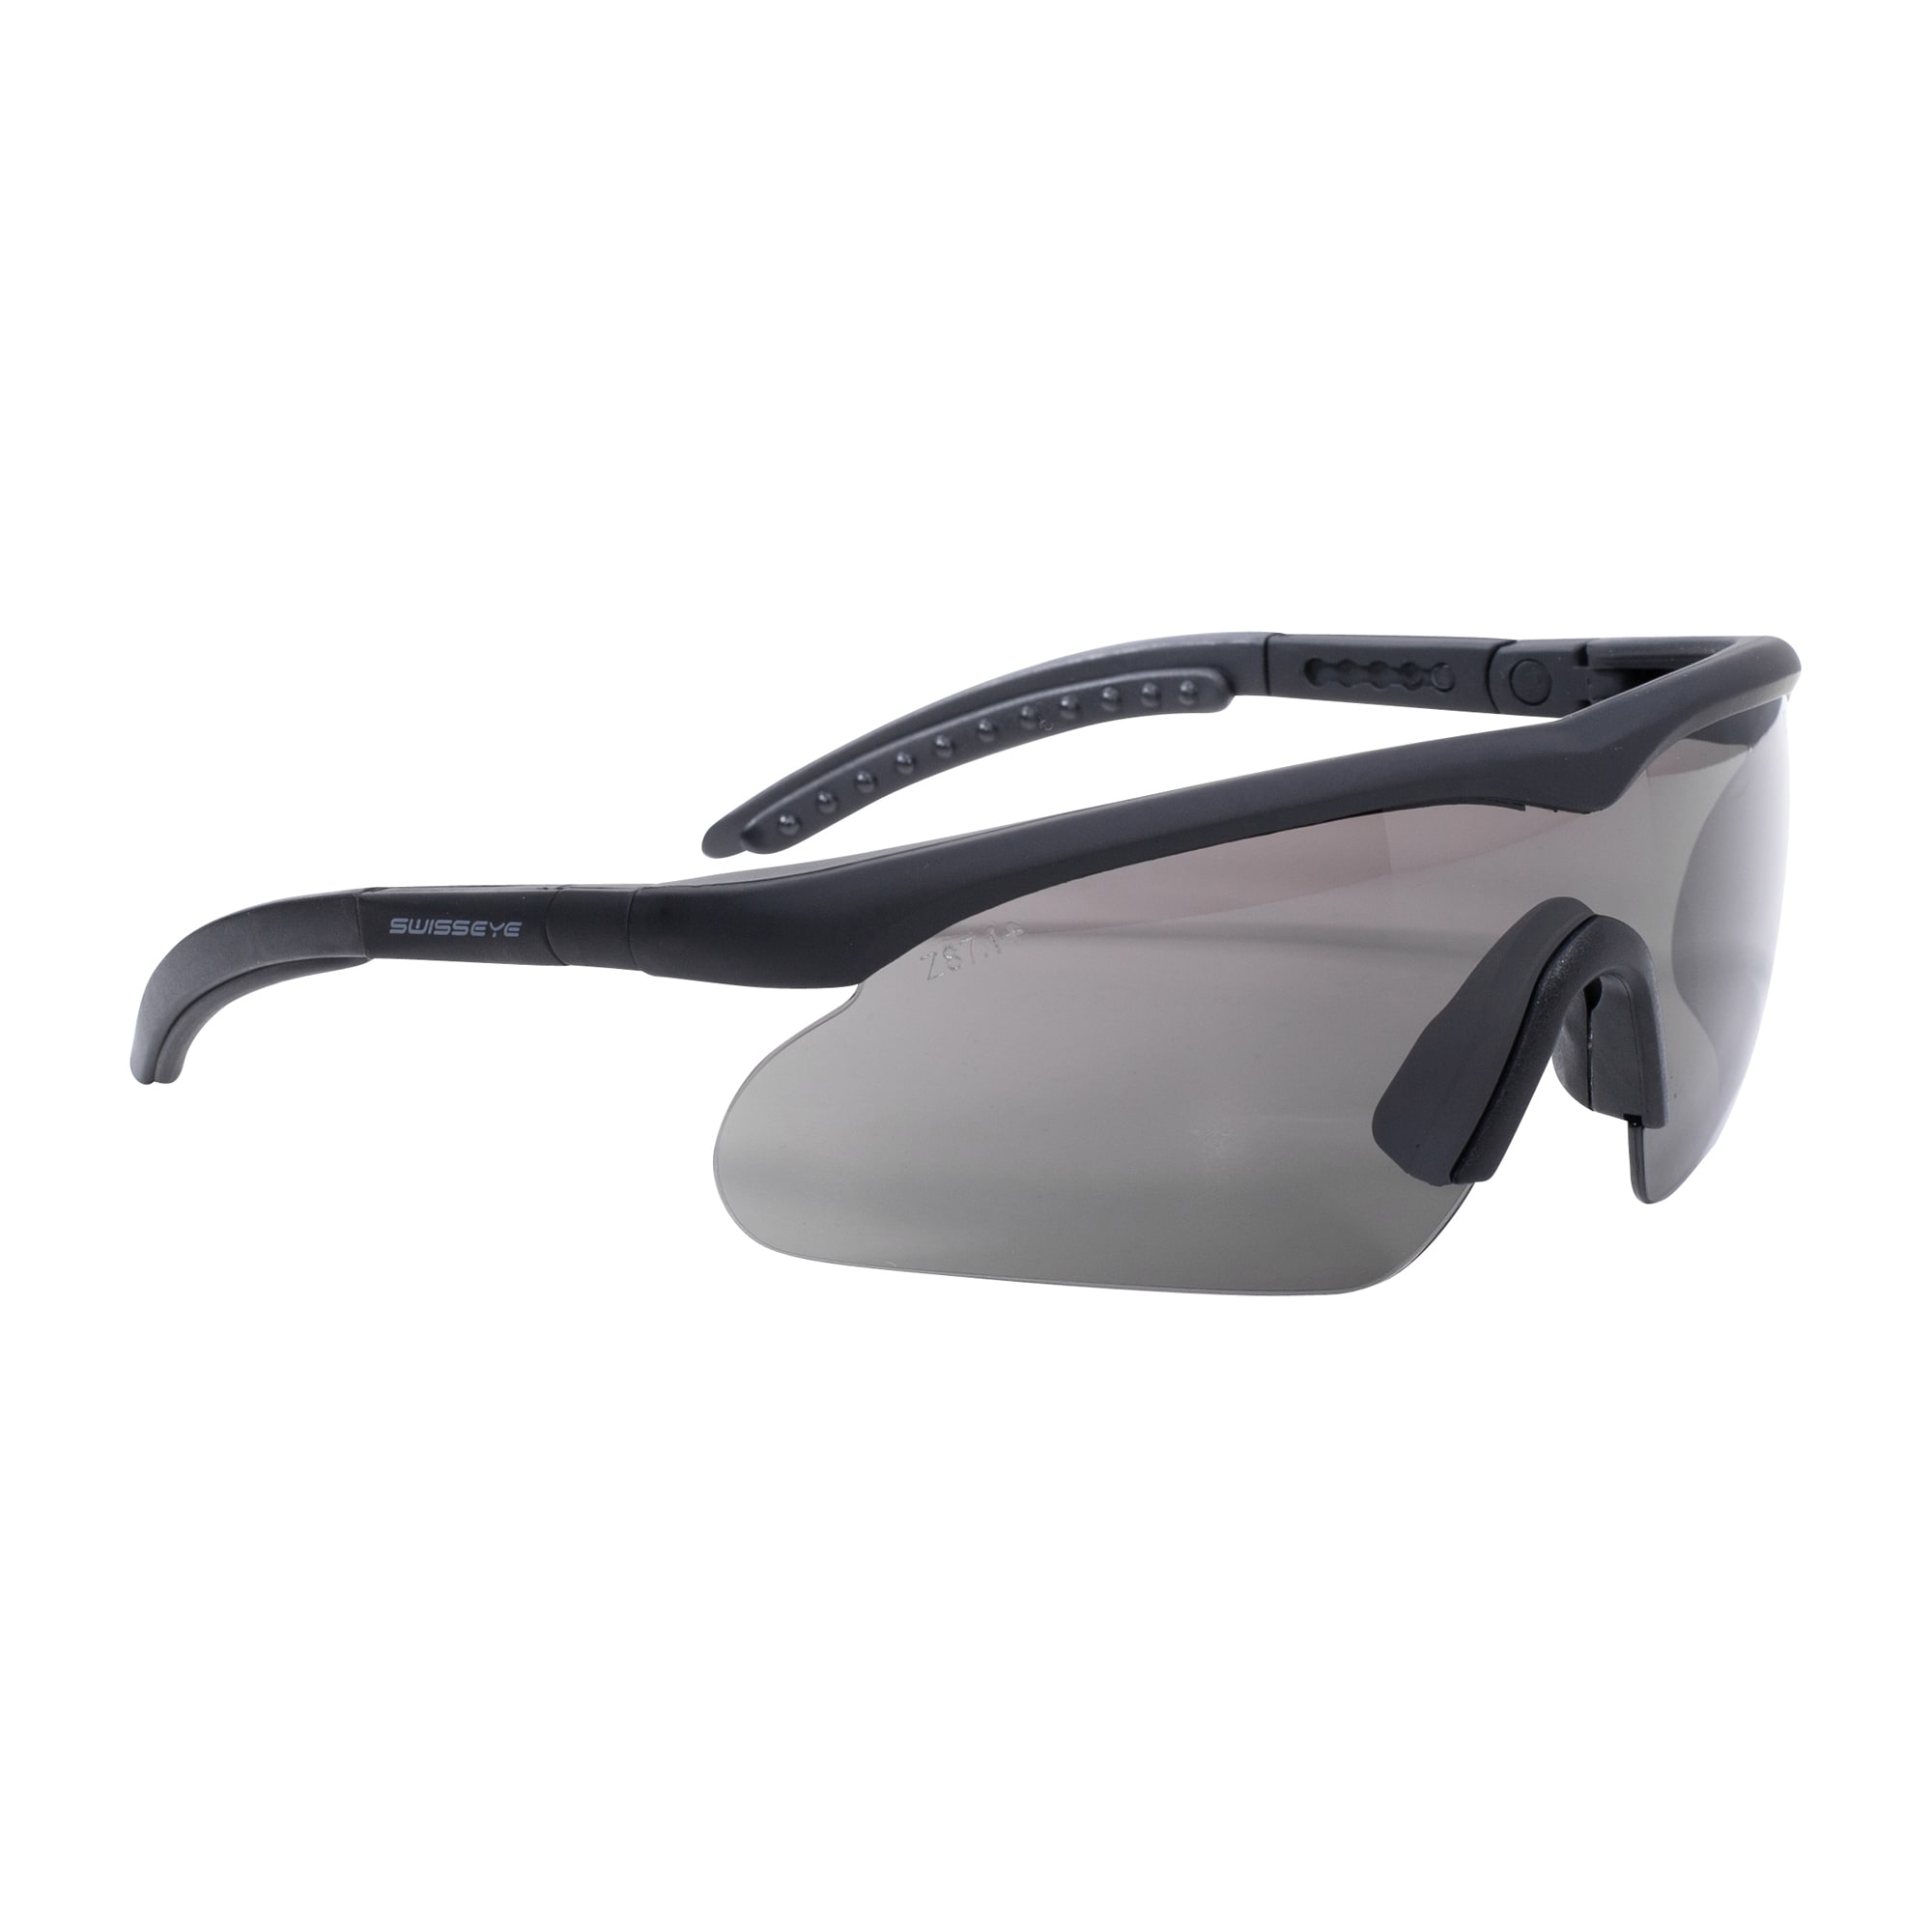 Purchase the Swiss Eye Safety Glasses Raptor black by ASMC